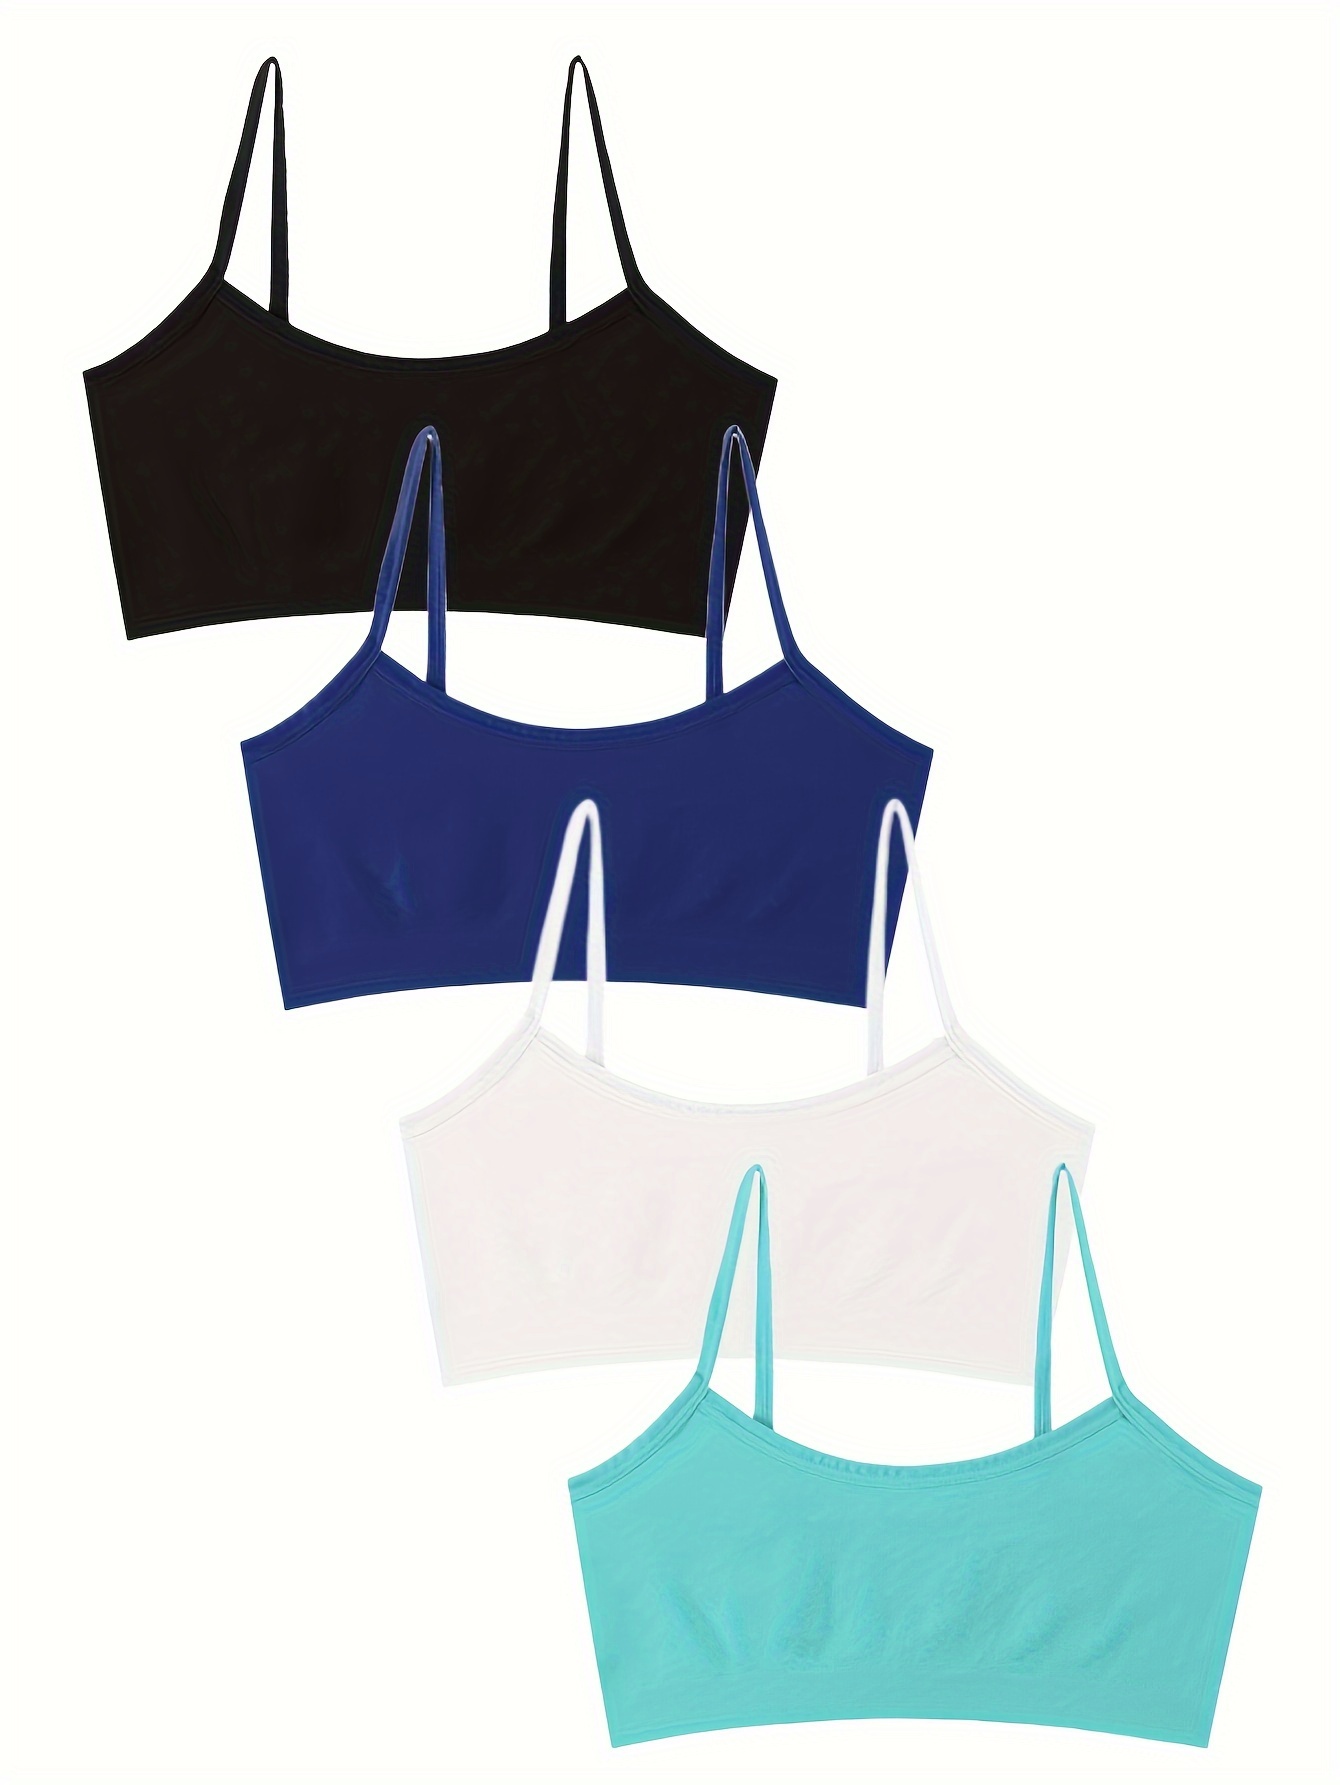 Training bras for girls age is 9-13 yrs old. 